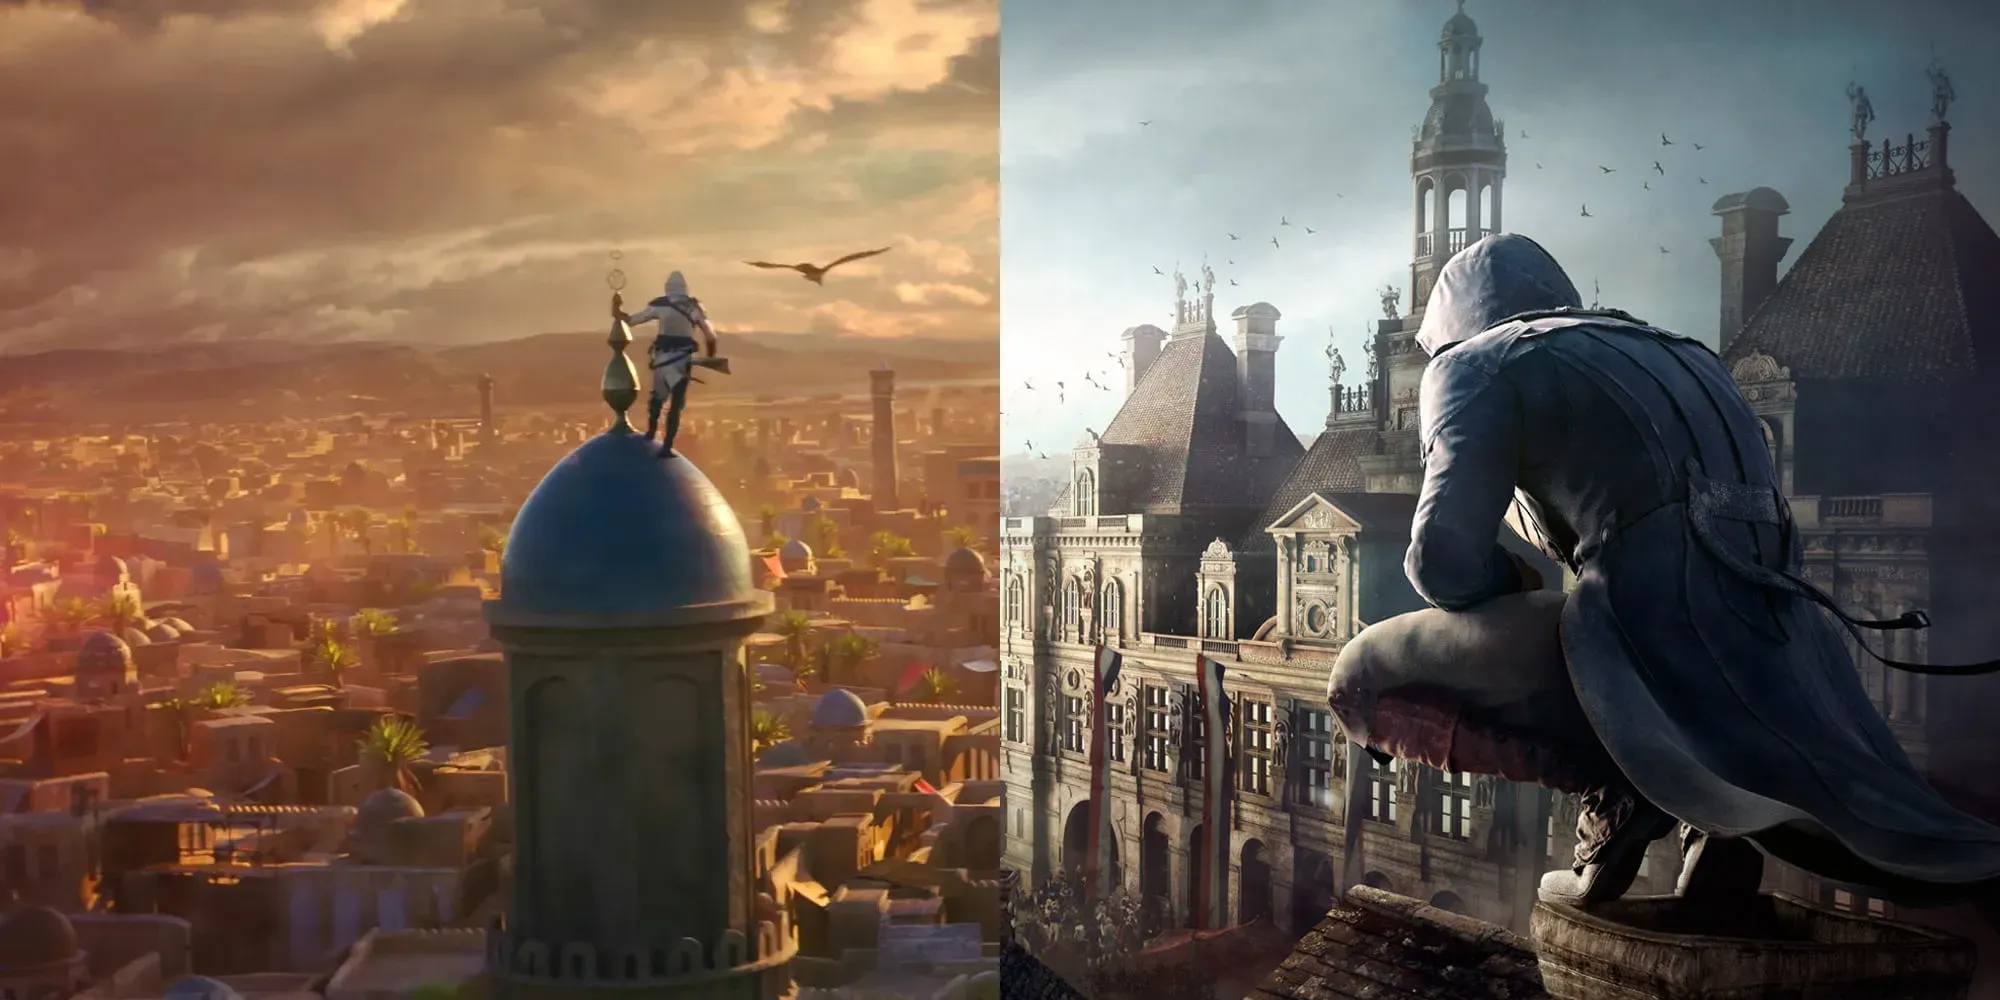 Image of Assassin's Creed protagonists overlooking Baghdad and Paris from Assassin's Creed Mirage and Unity.